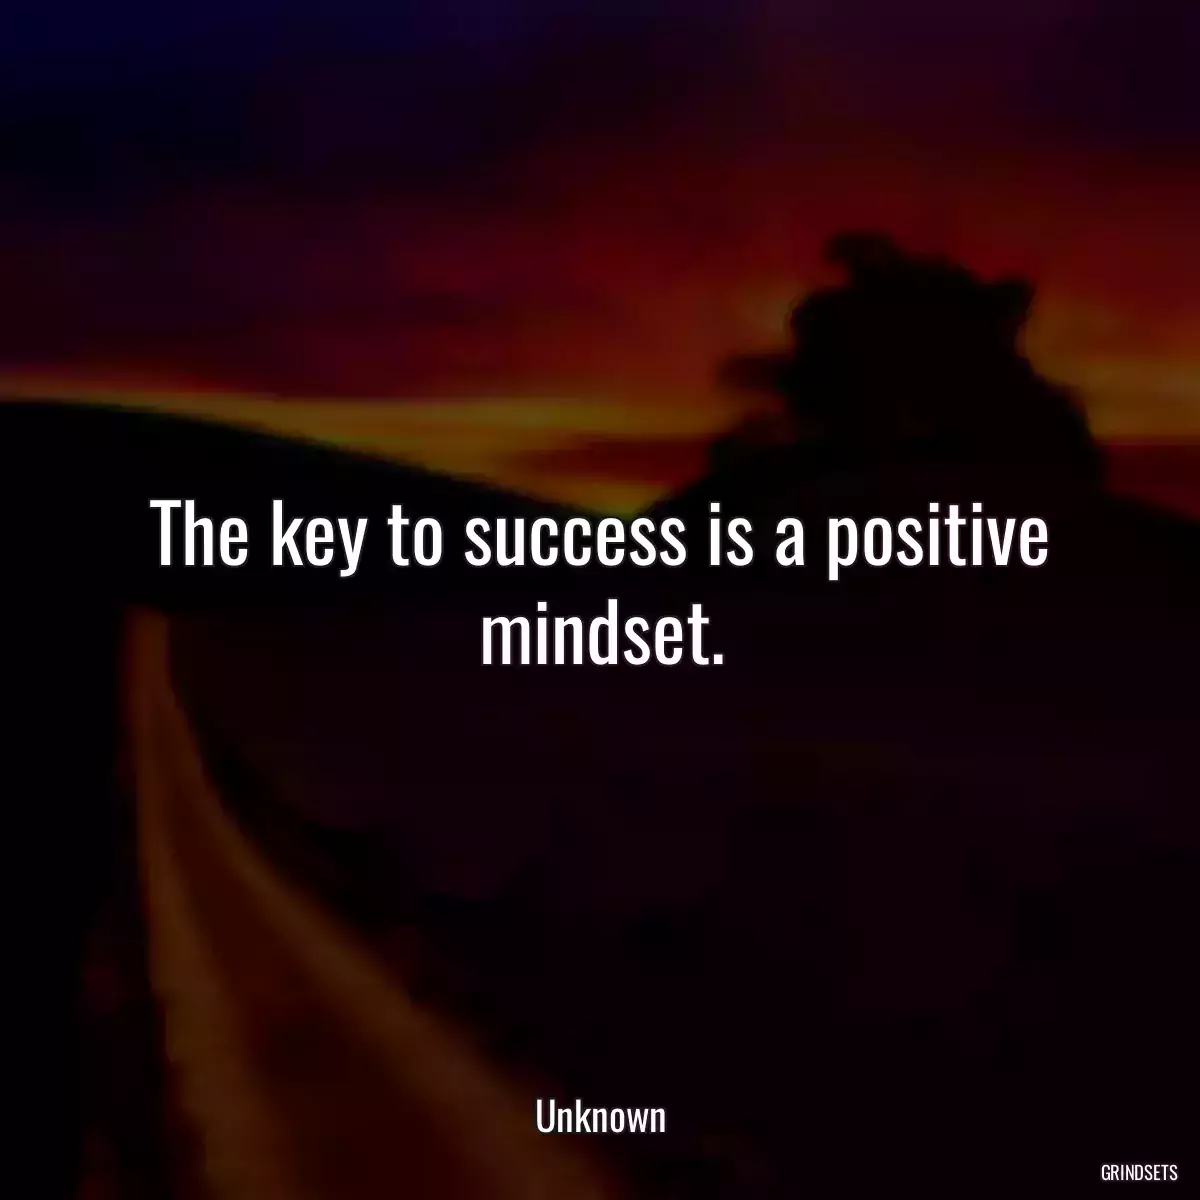 The key to success is a positive mindset.